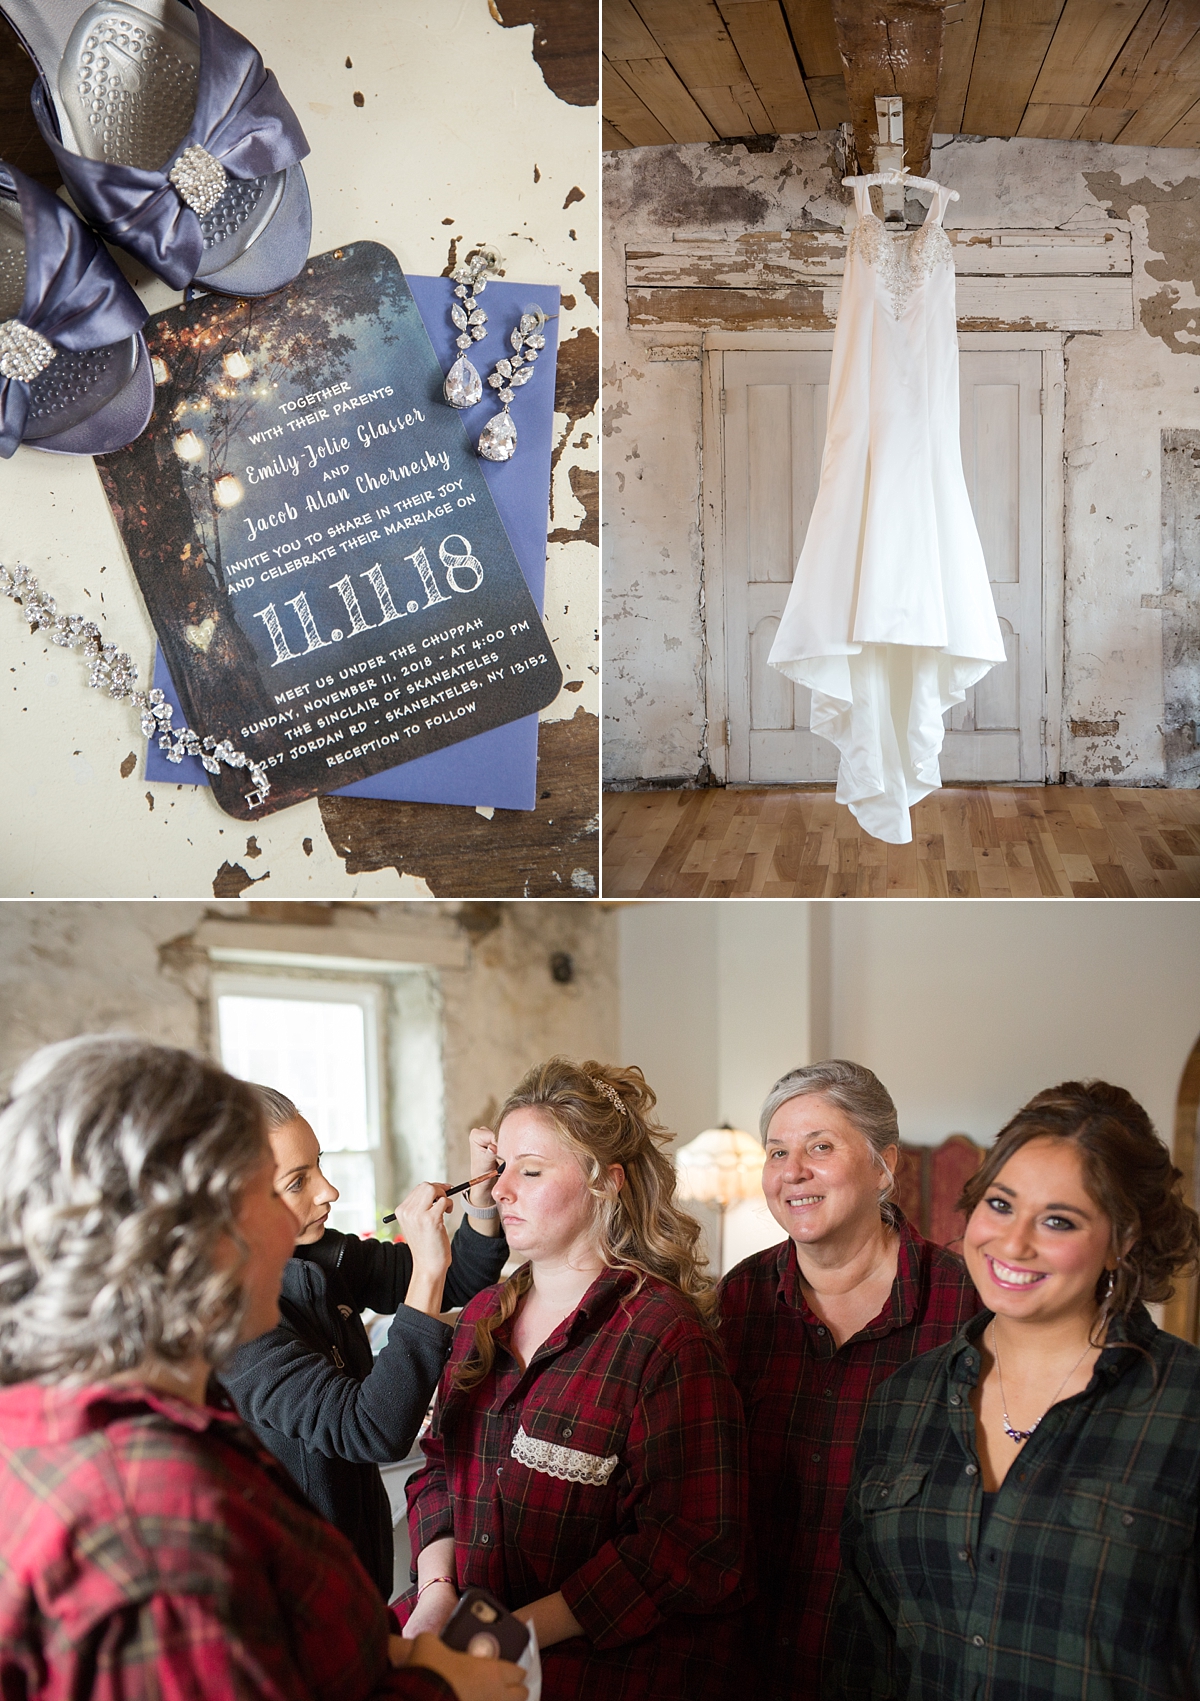 zazzle.com wedding invitation, wedding dress hands in the sinclair of skaneateles, bride in plaid gets makeup done